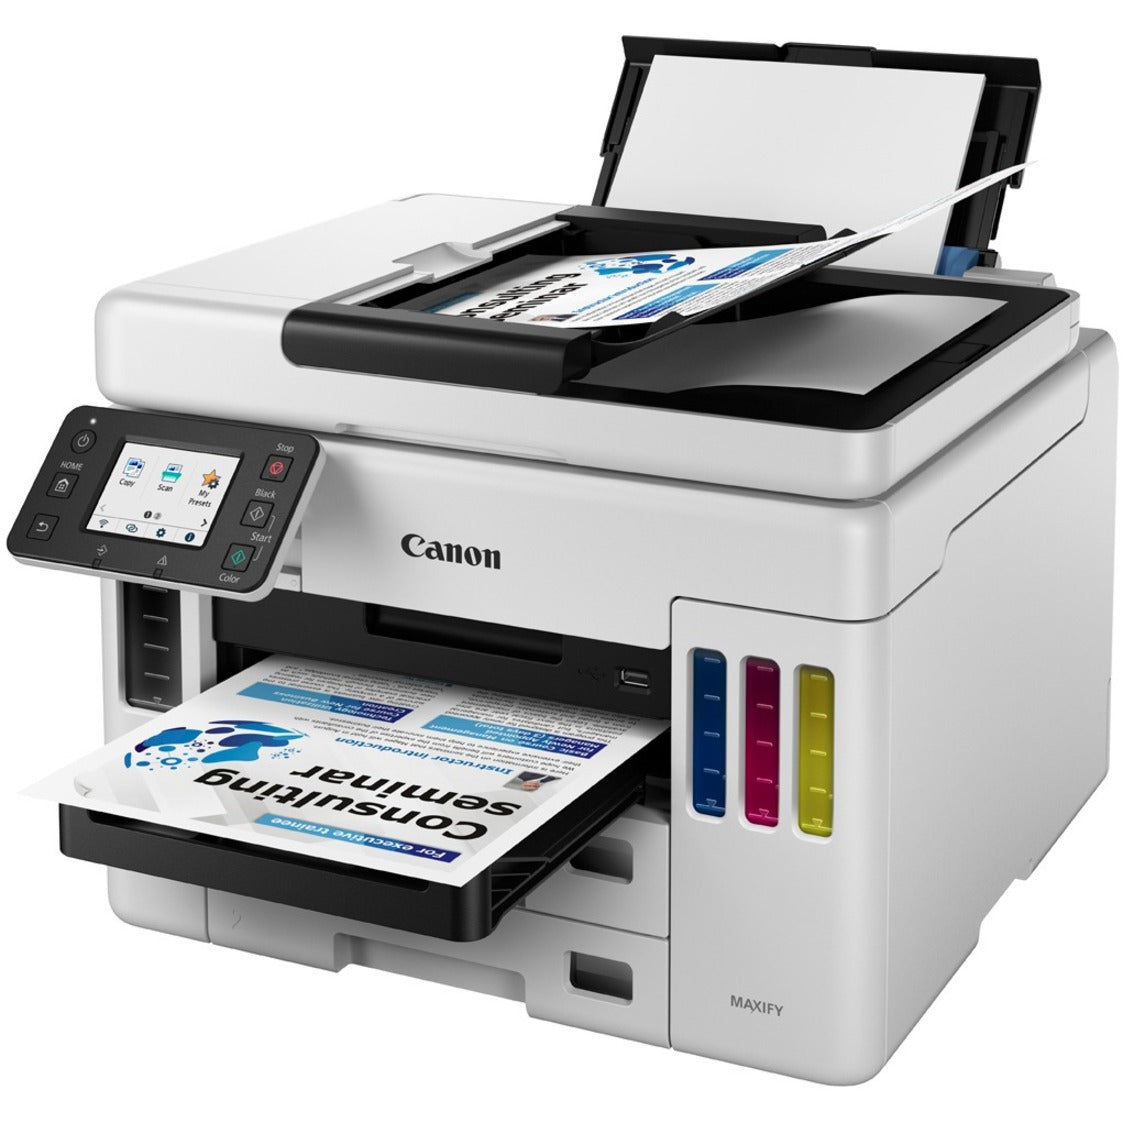 Canon 4470C037 MAXIFY GX6021 Wireless MegaTank All-in-One Printer, Color, Flatbed Scanner, 3 Year Warranty, 45000 Duty Cycle, Energy Star, USB, 2.70" Touchscreen LCD, Inkjet Multifunction Printer